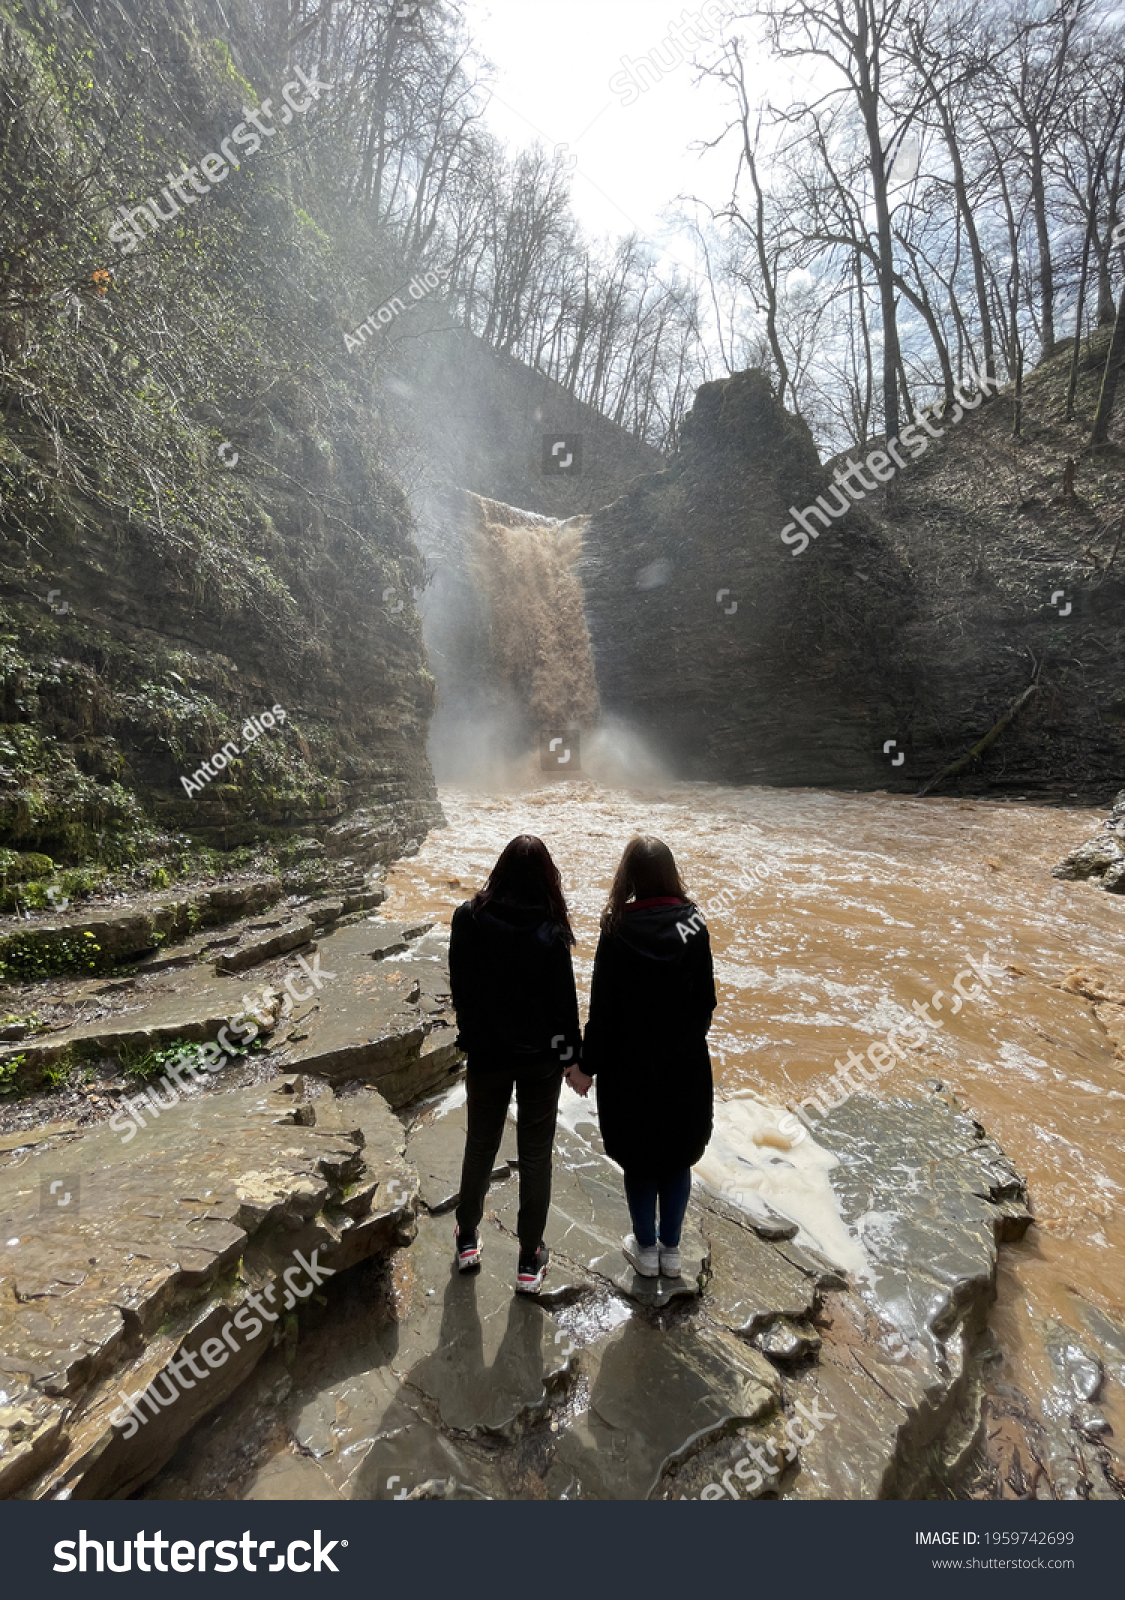 Rear view of two women looking on powerful muddy waterfall. Tourists standing on rocks in mountainous terrain and enjoying beautiful view of cataract #1959742699